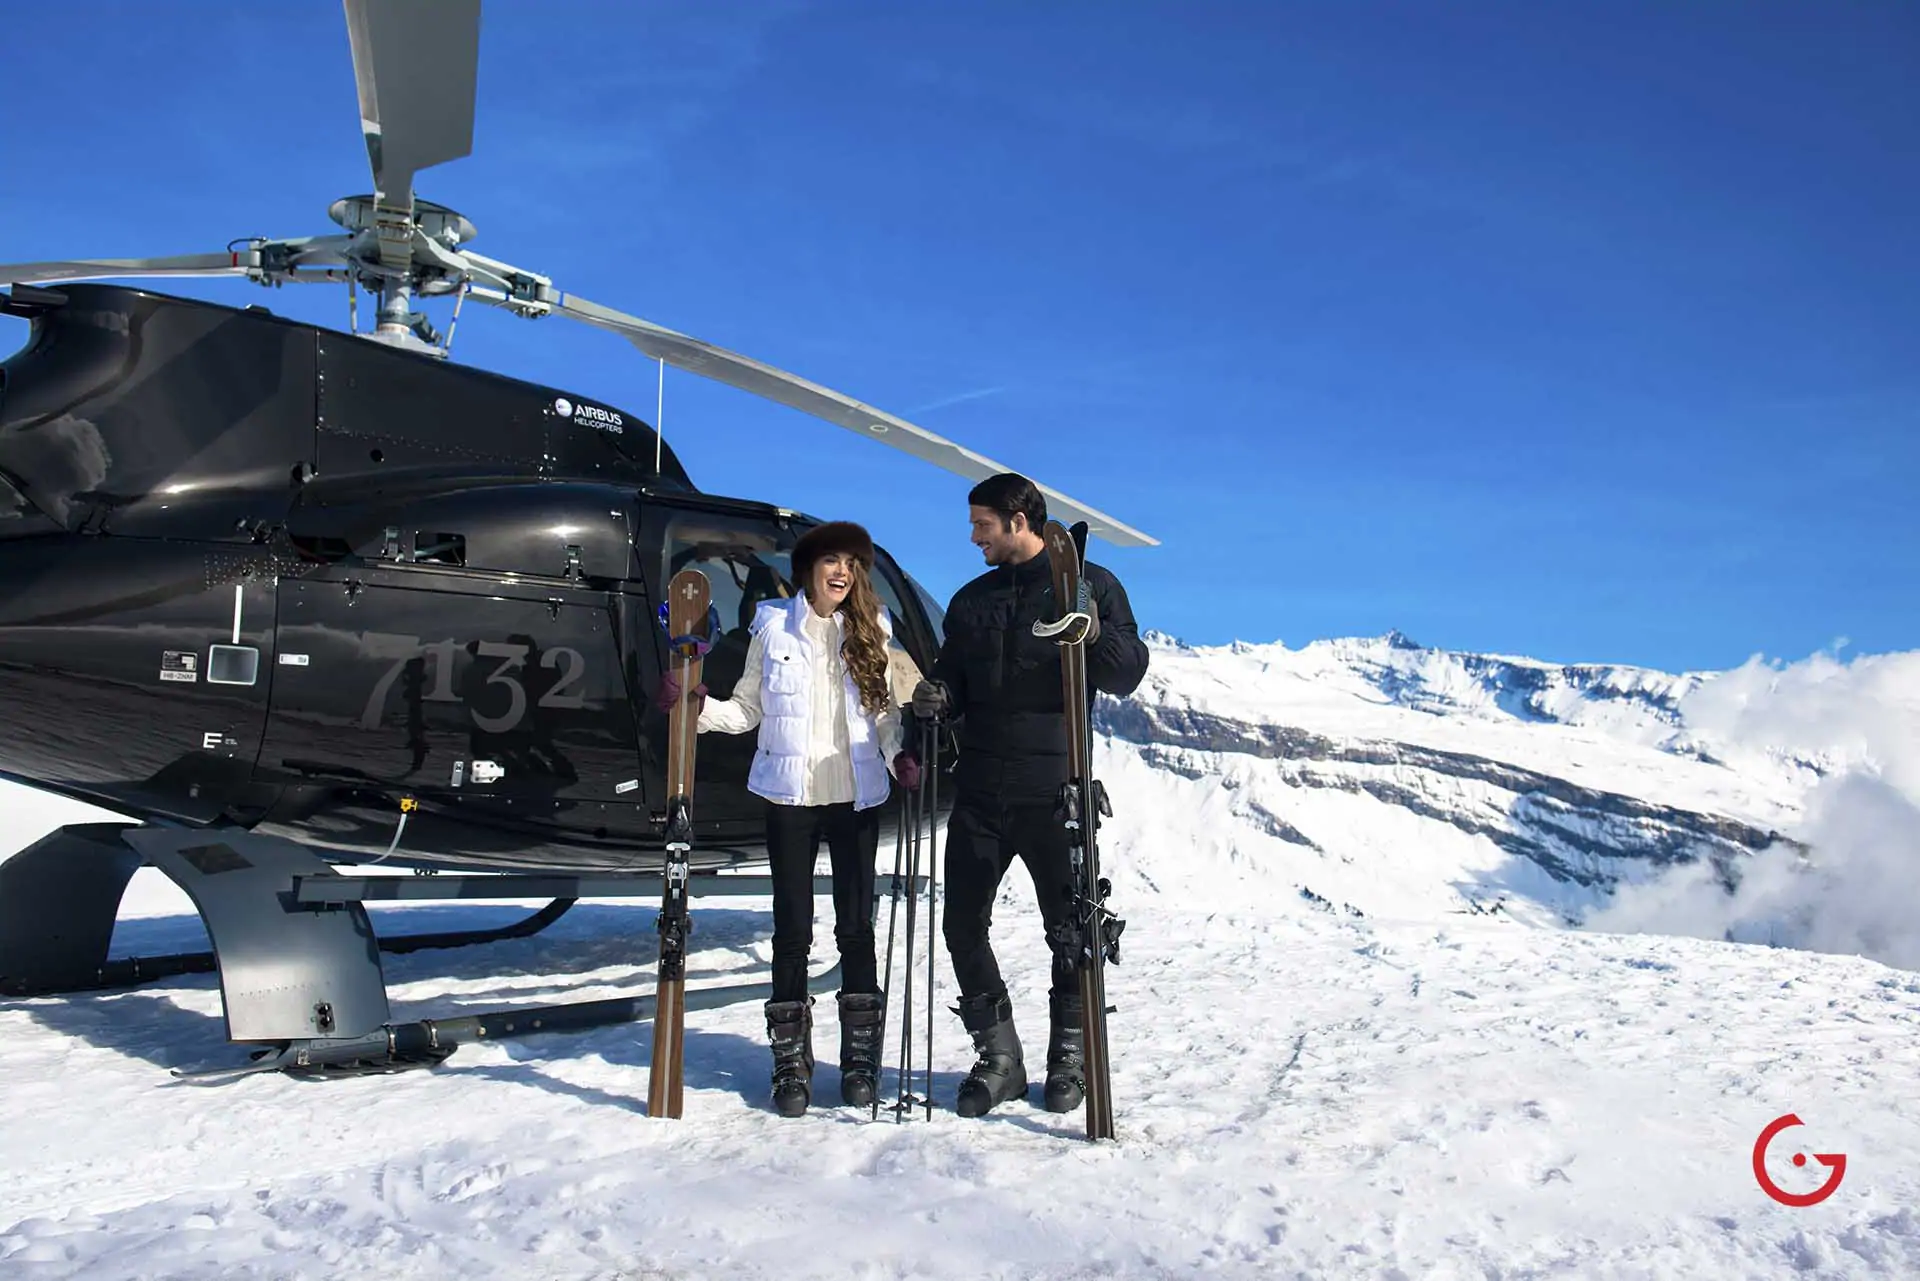 Couple arrives for ski trip in private helicopter - Professional Photographer Lifestyle Photography Wardrobe Stylist